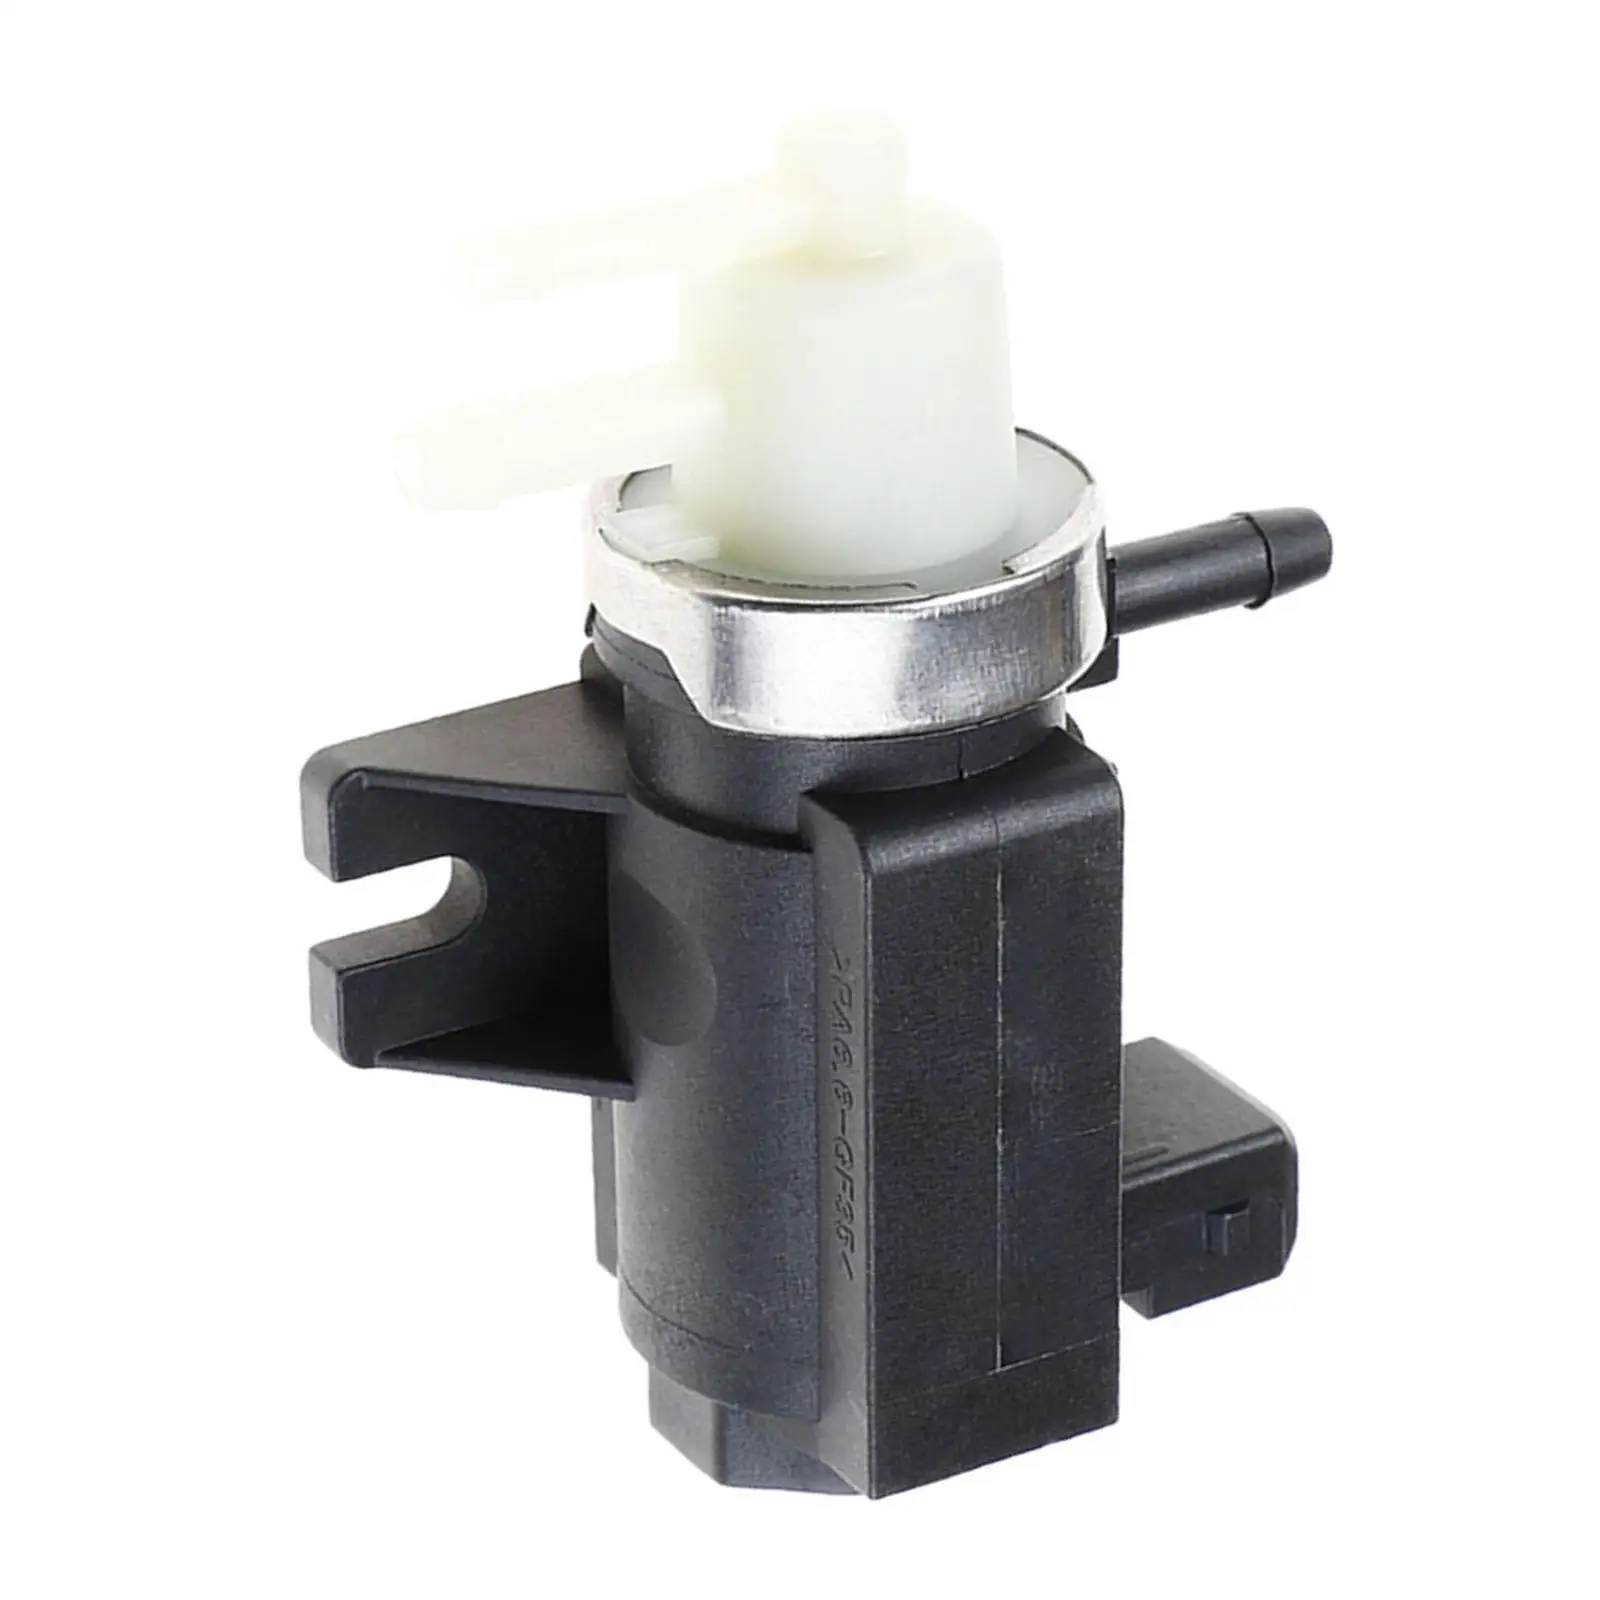 Solenoid Boost Valve 1H0906627A 1.9Tdi for Audi A3 A4 A6 1H0 906 627 A